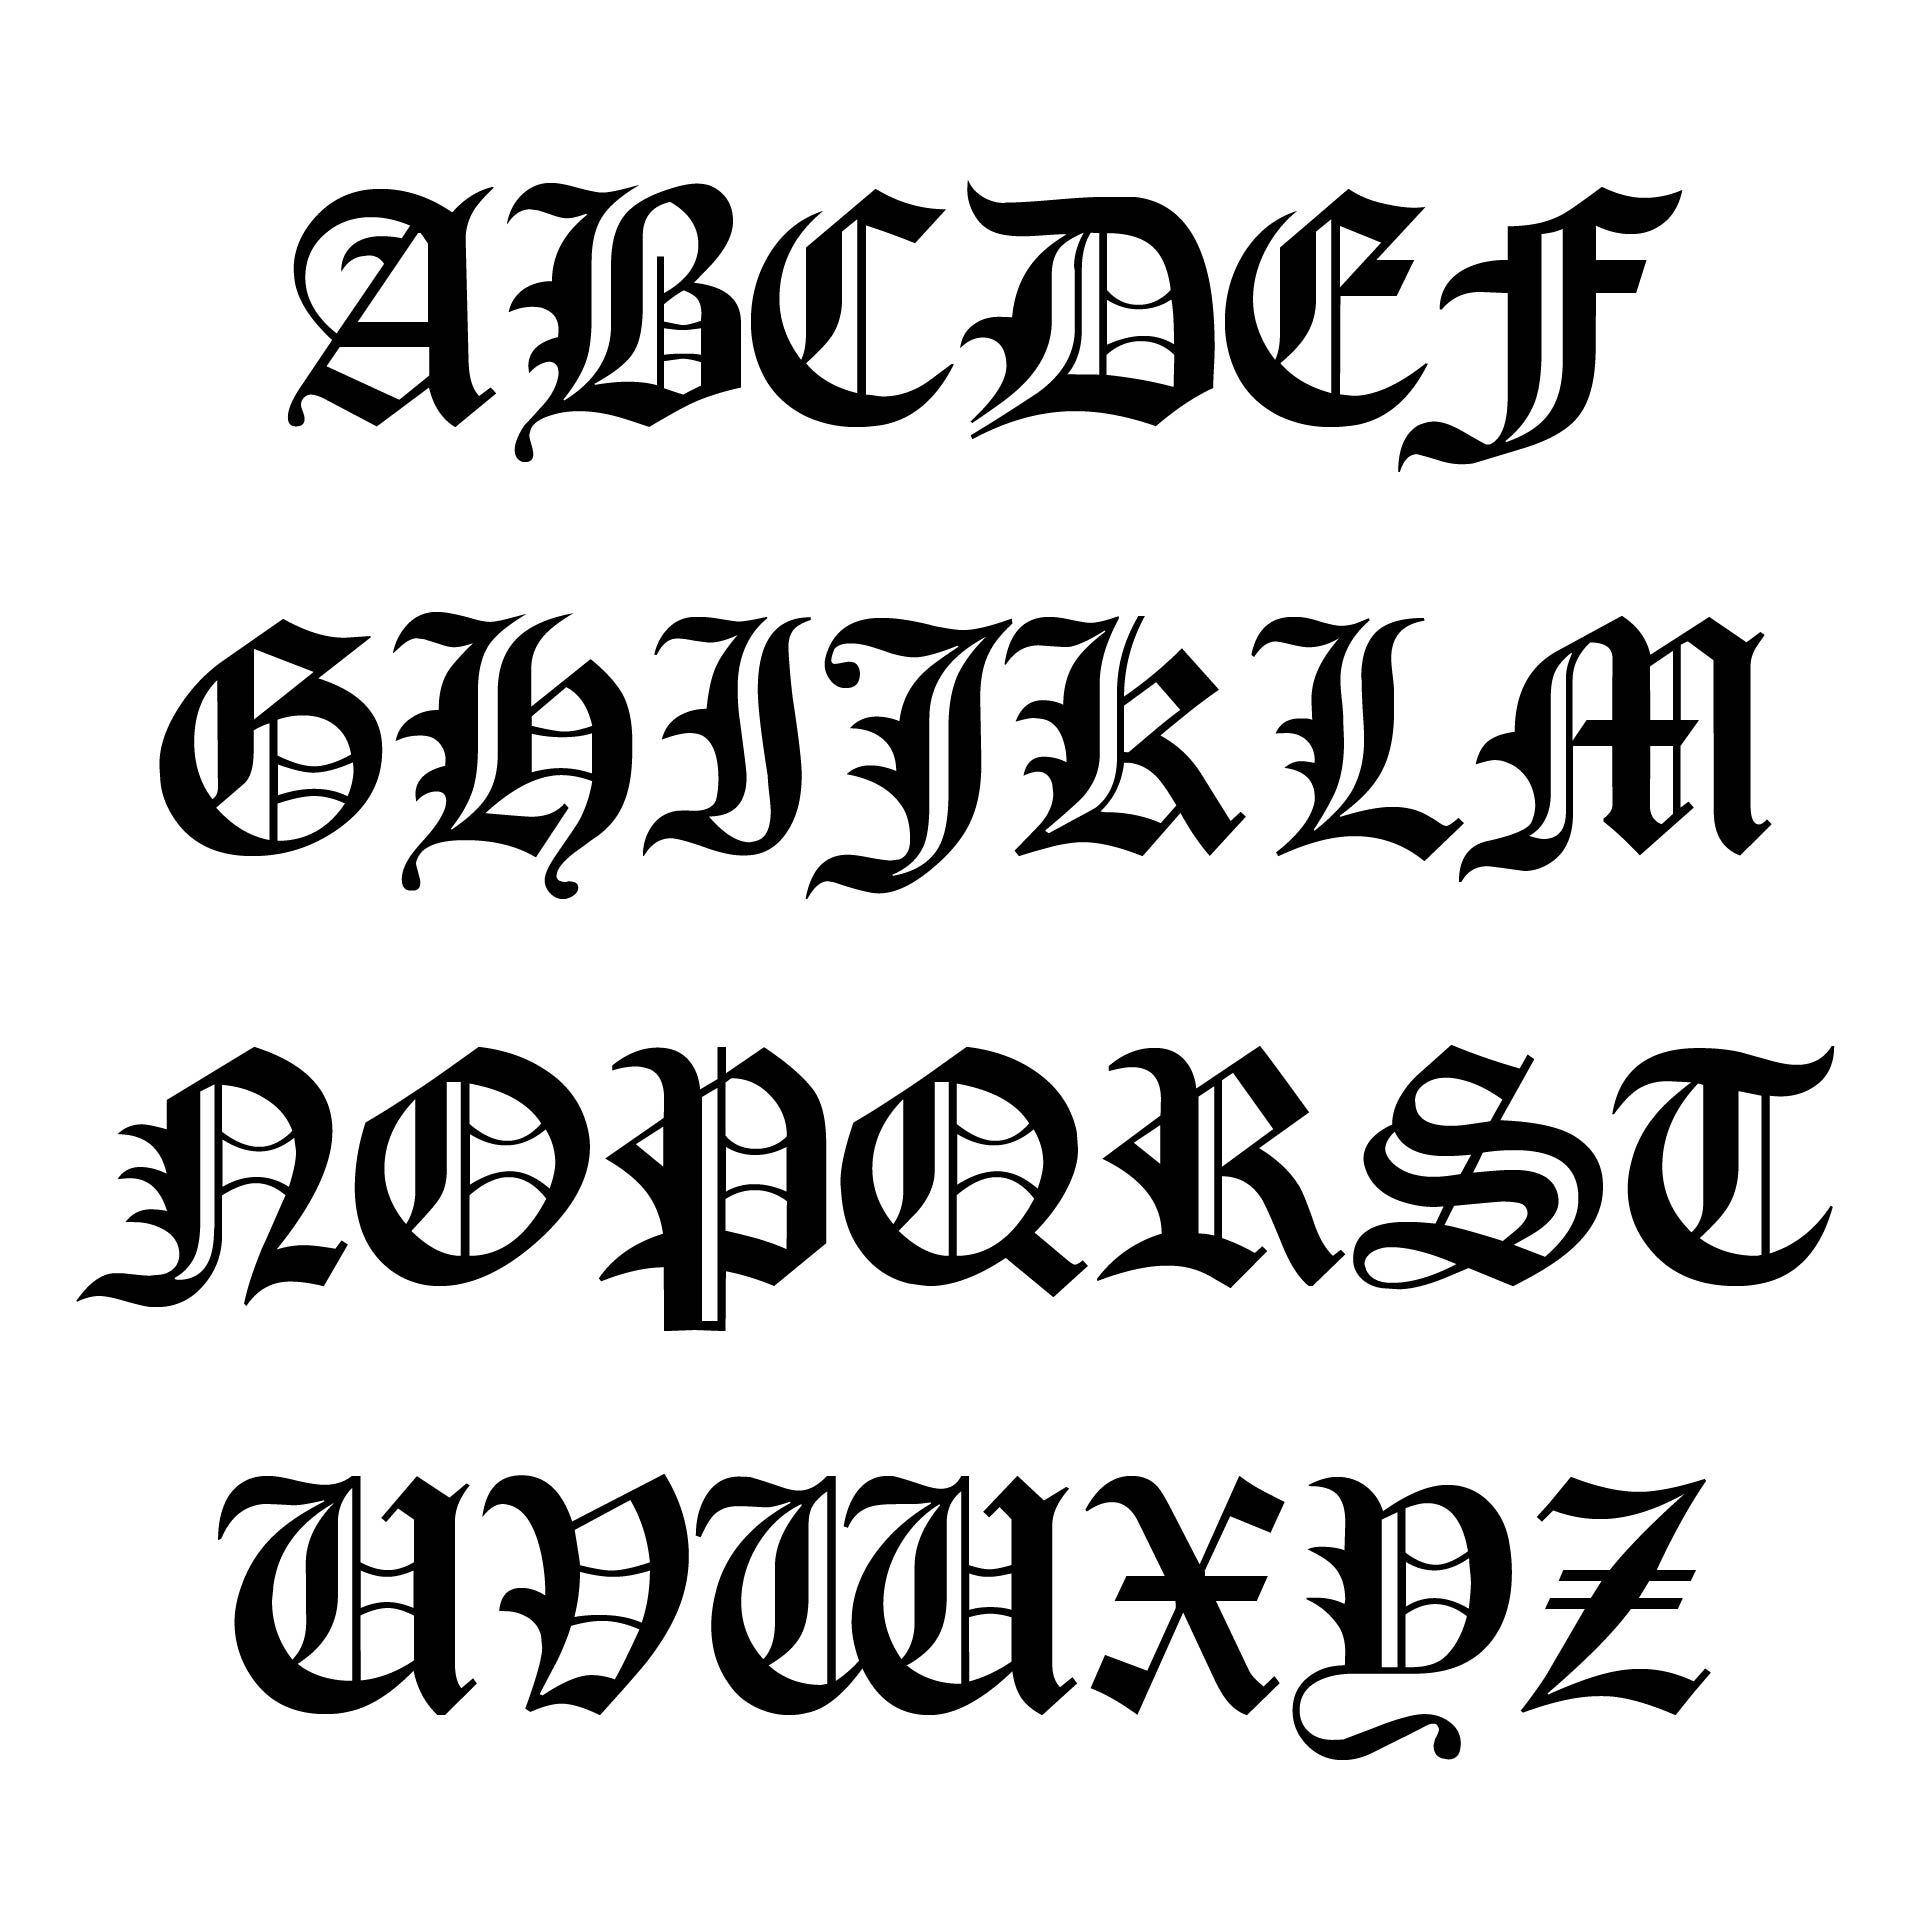 5 Best Images of Printable Old English Alphabet A-Z - Gothic Old